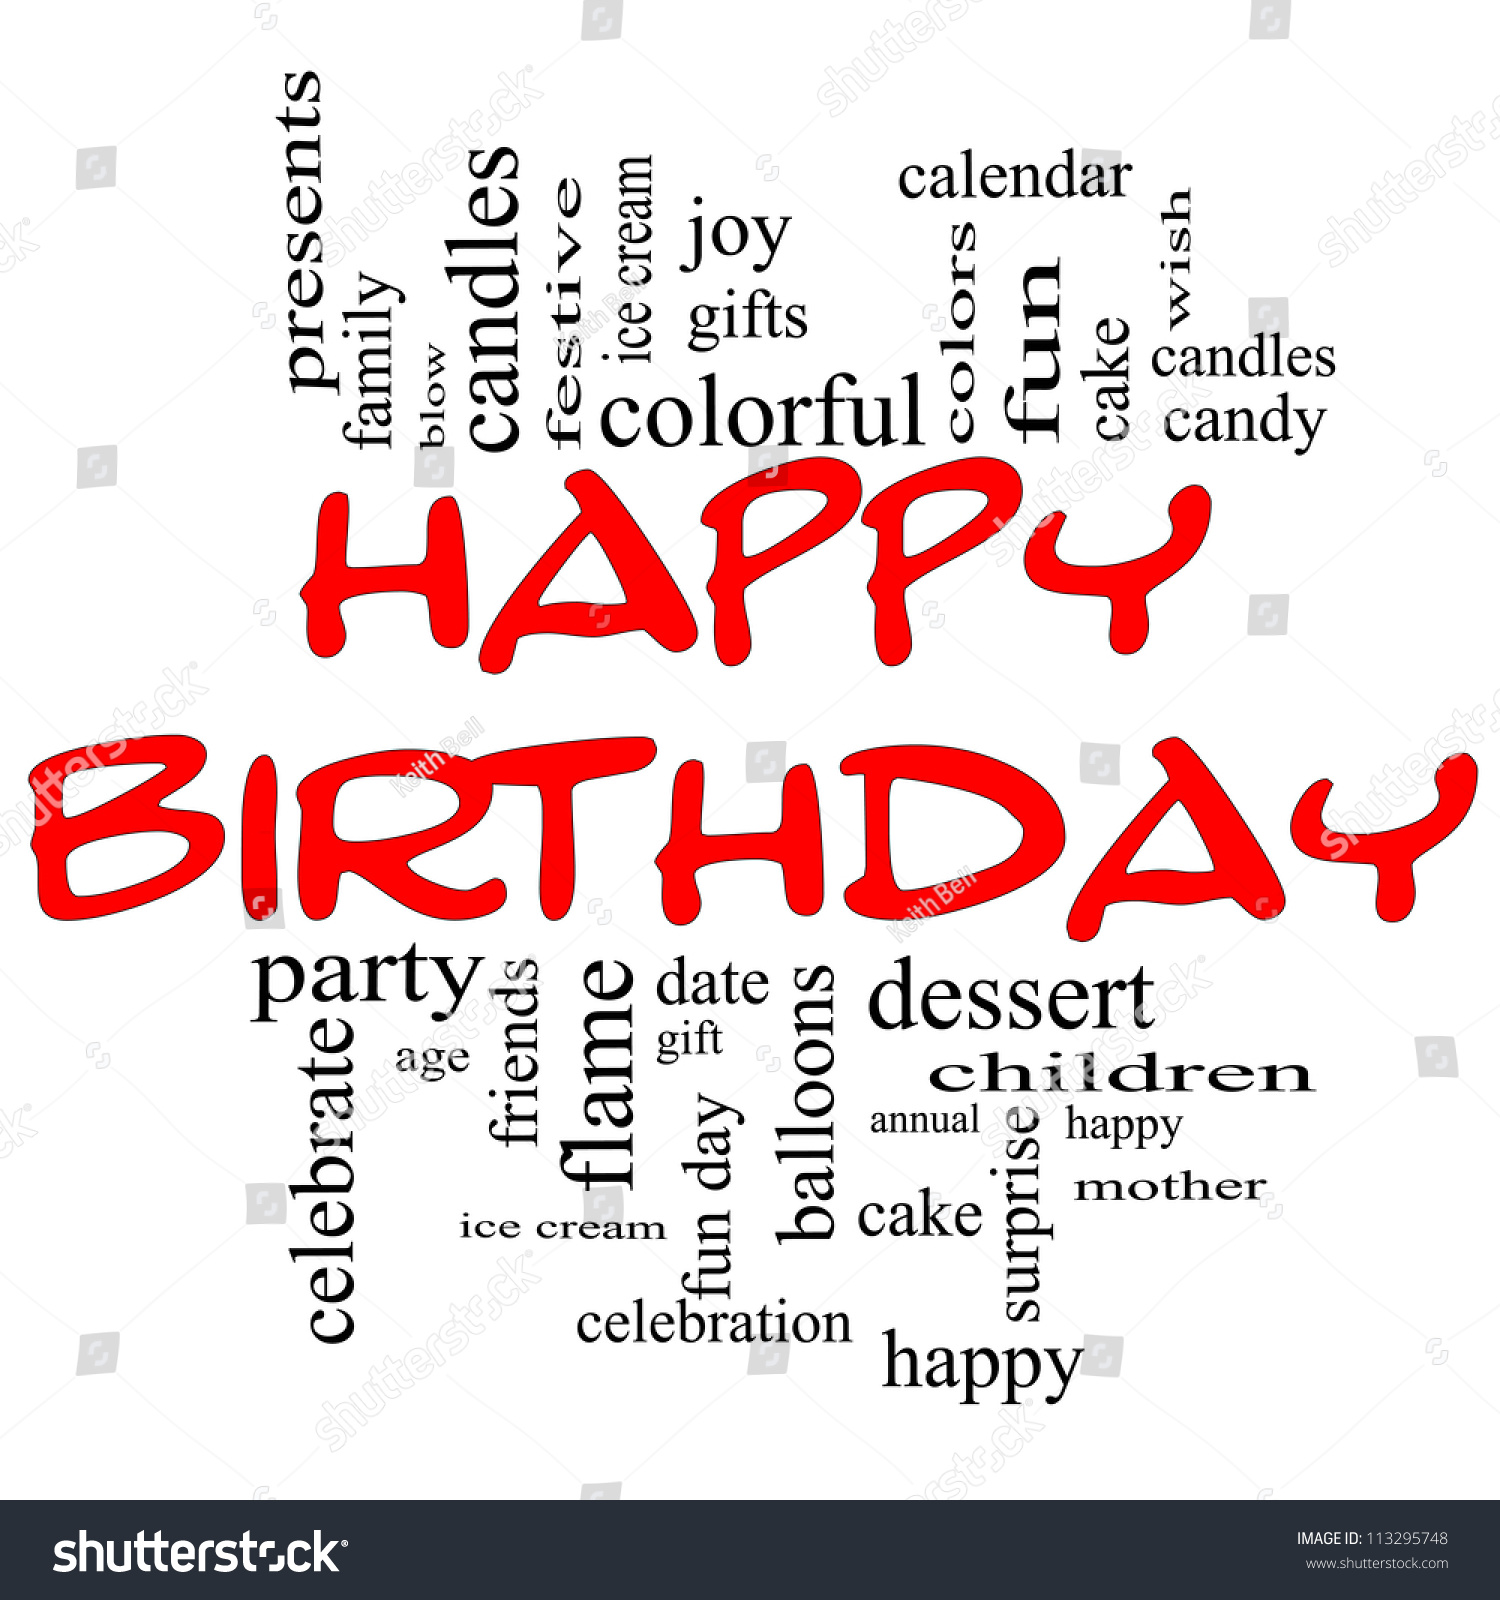 Happy Birthday Word Cloud Concept In Red & Black Letters With Great ...